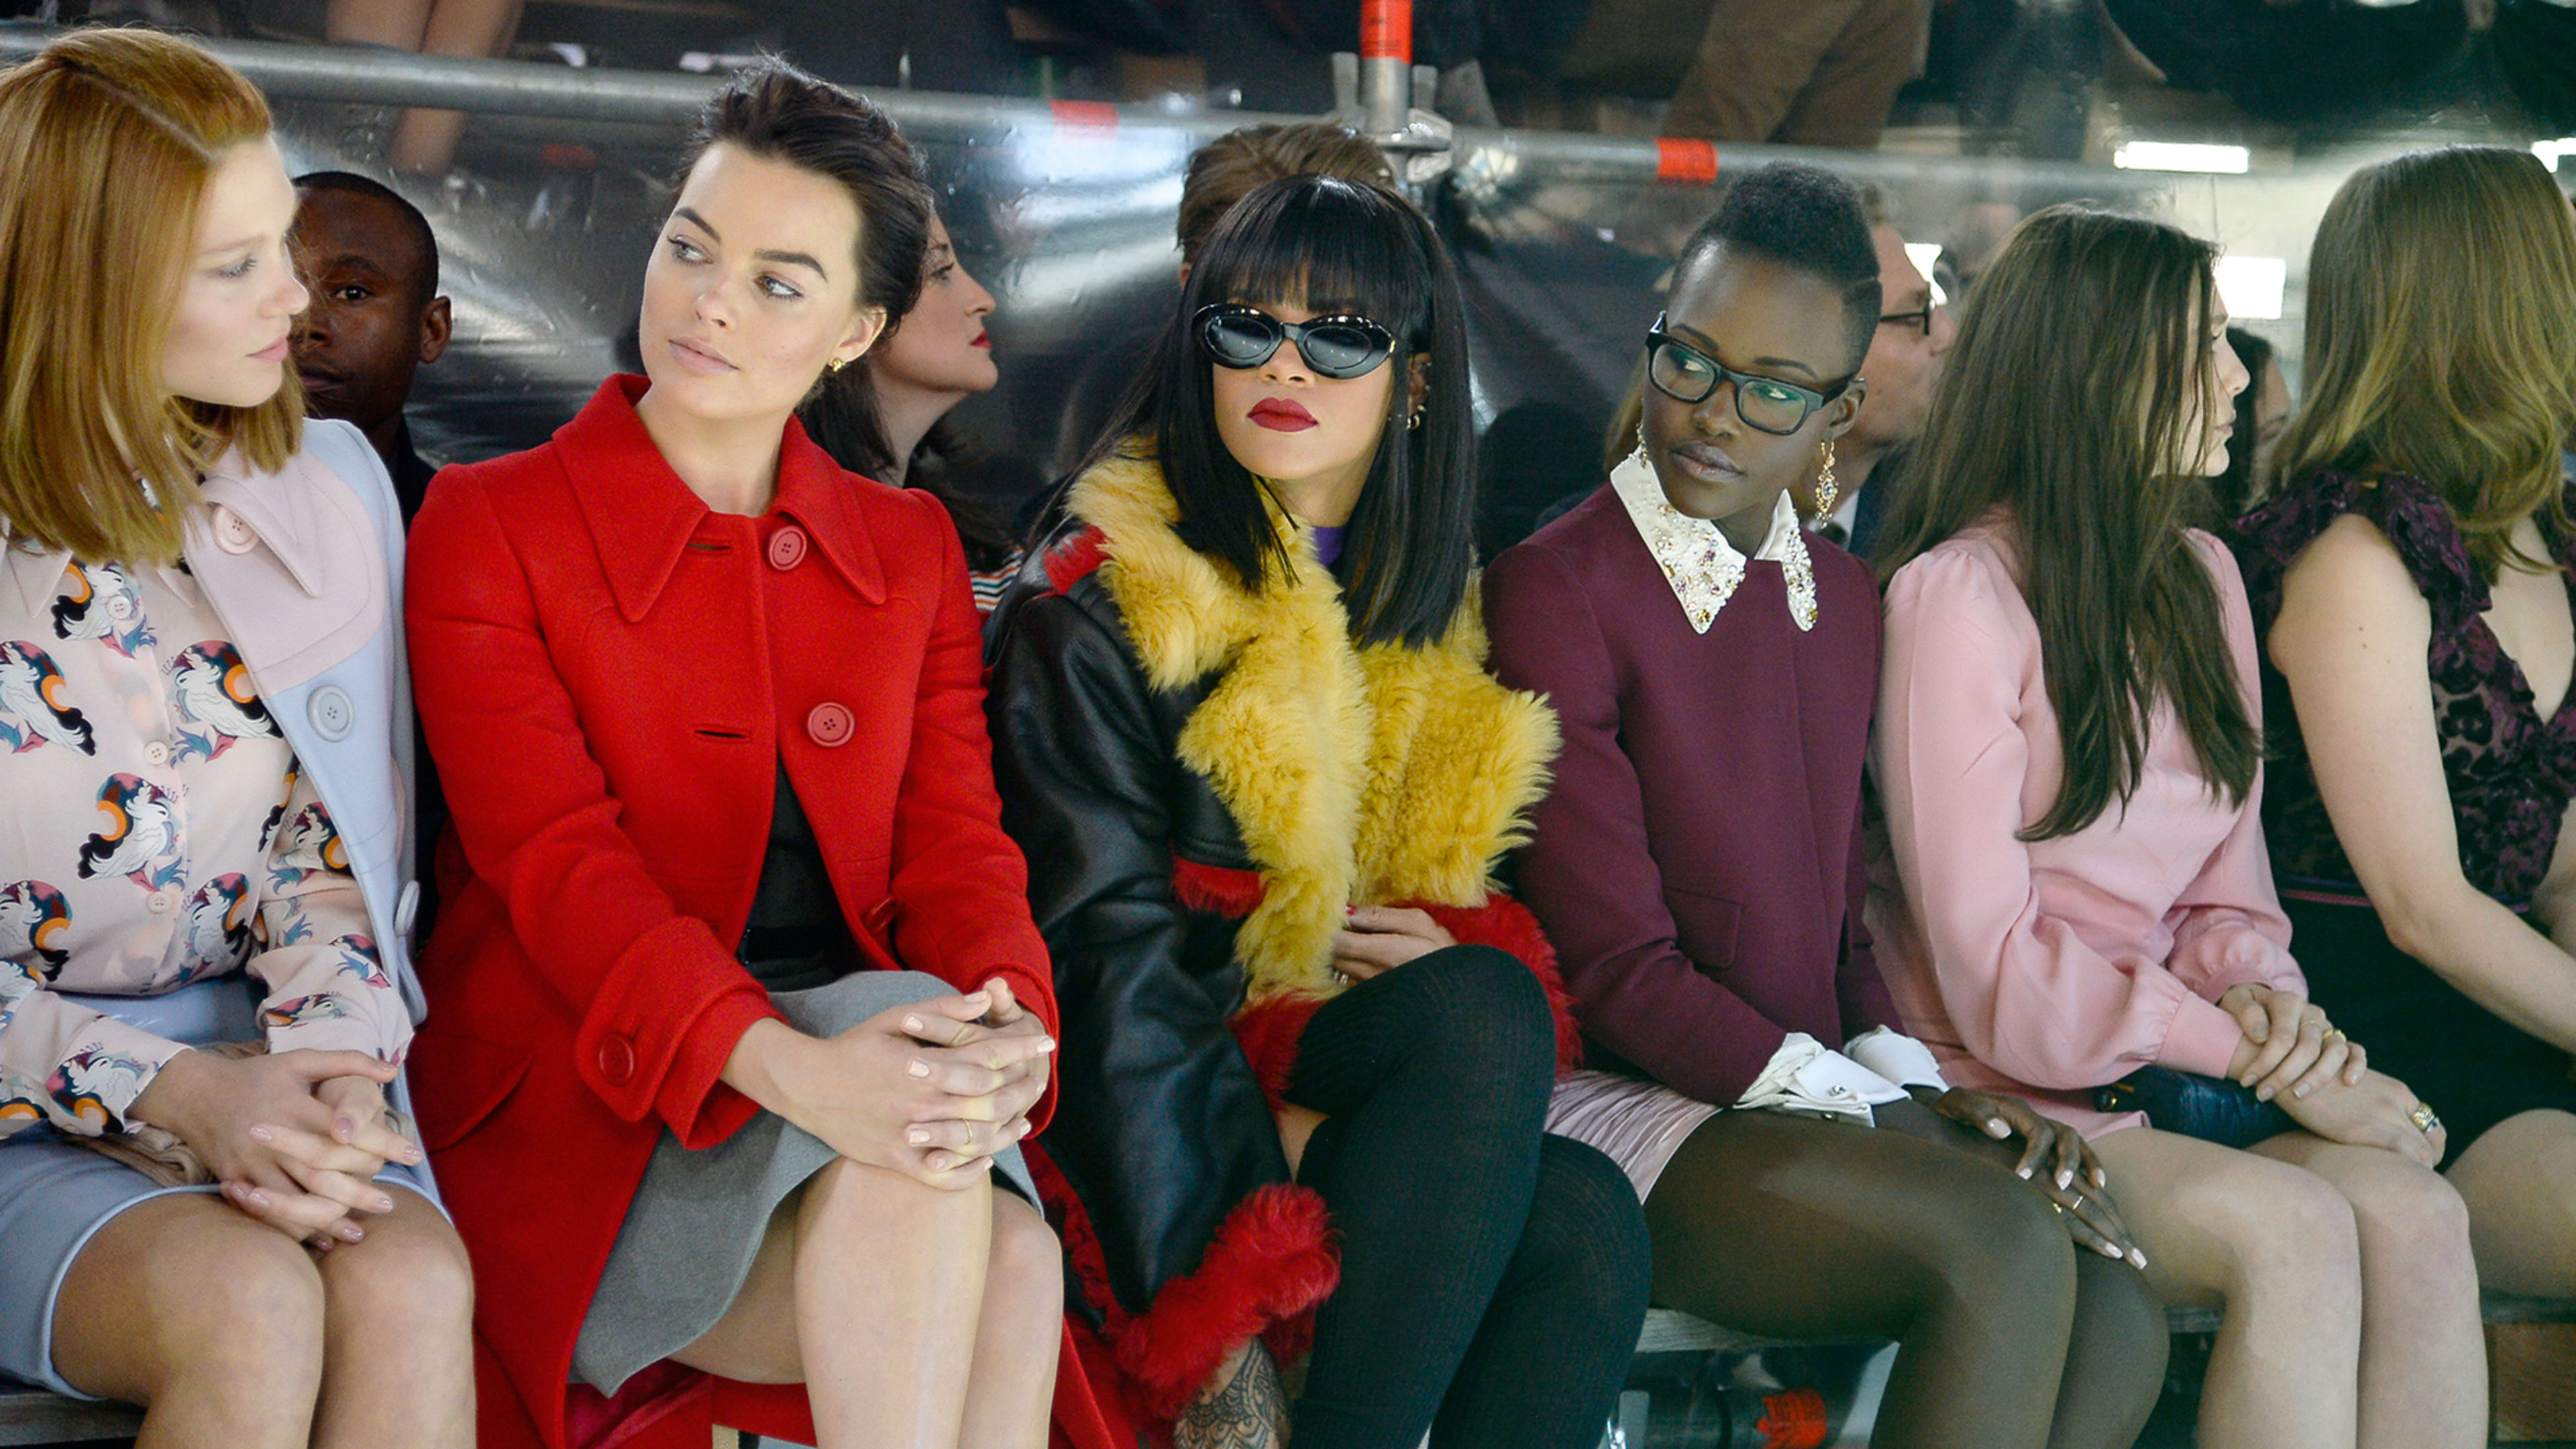 Rihanna And Lupita Nyong’o Will Now Star In A Movie Thanks To The Internet